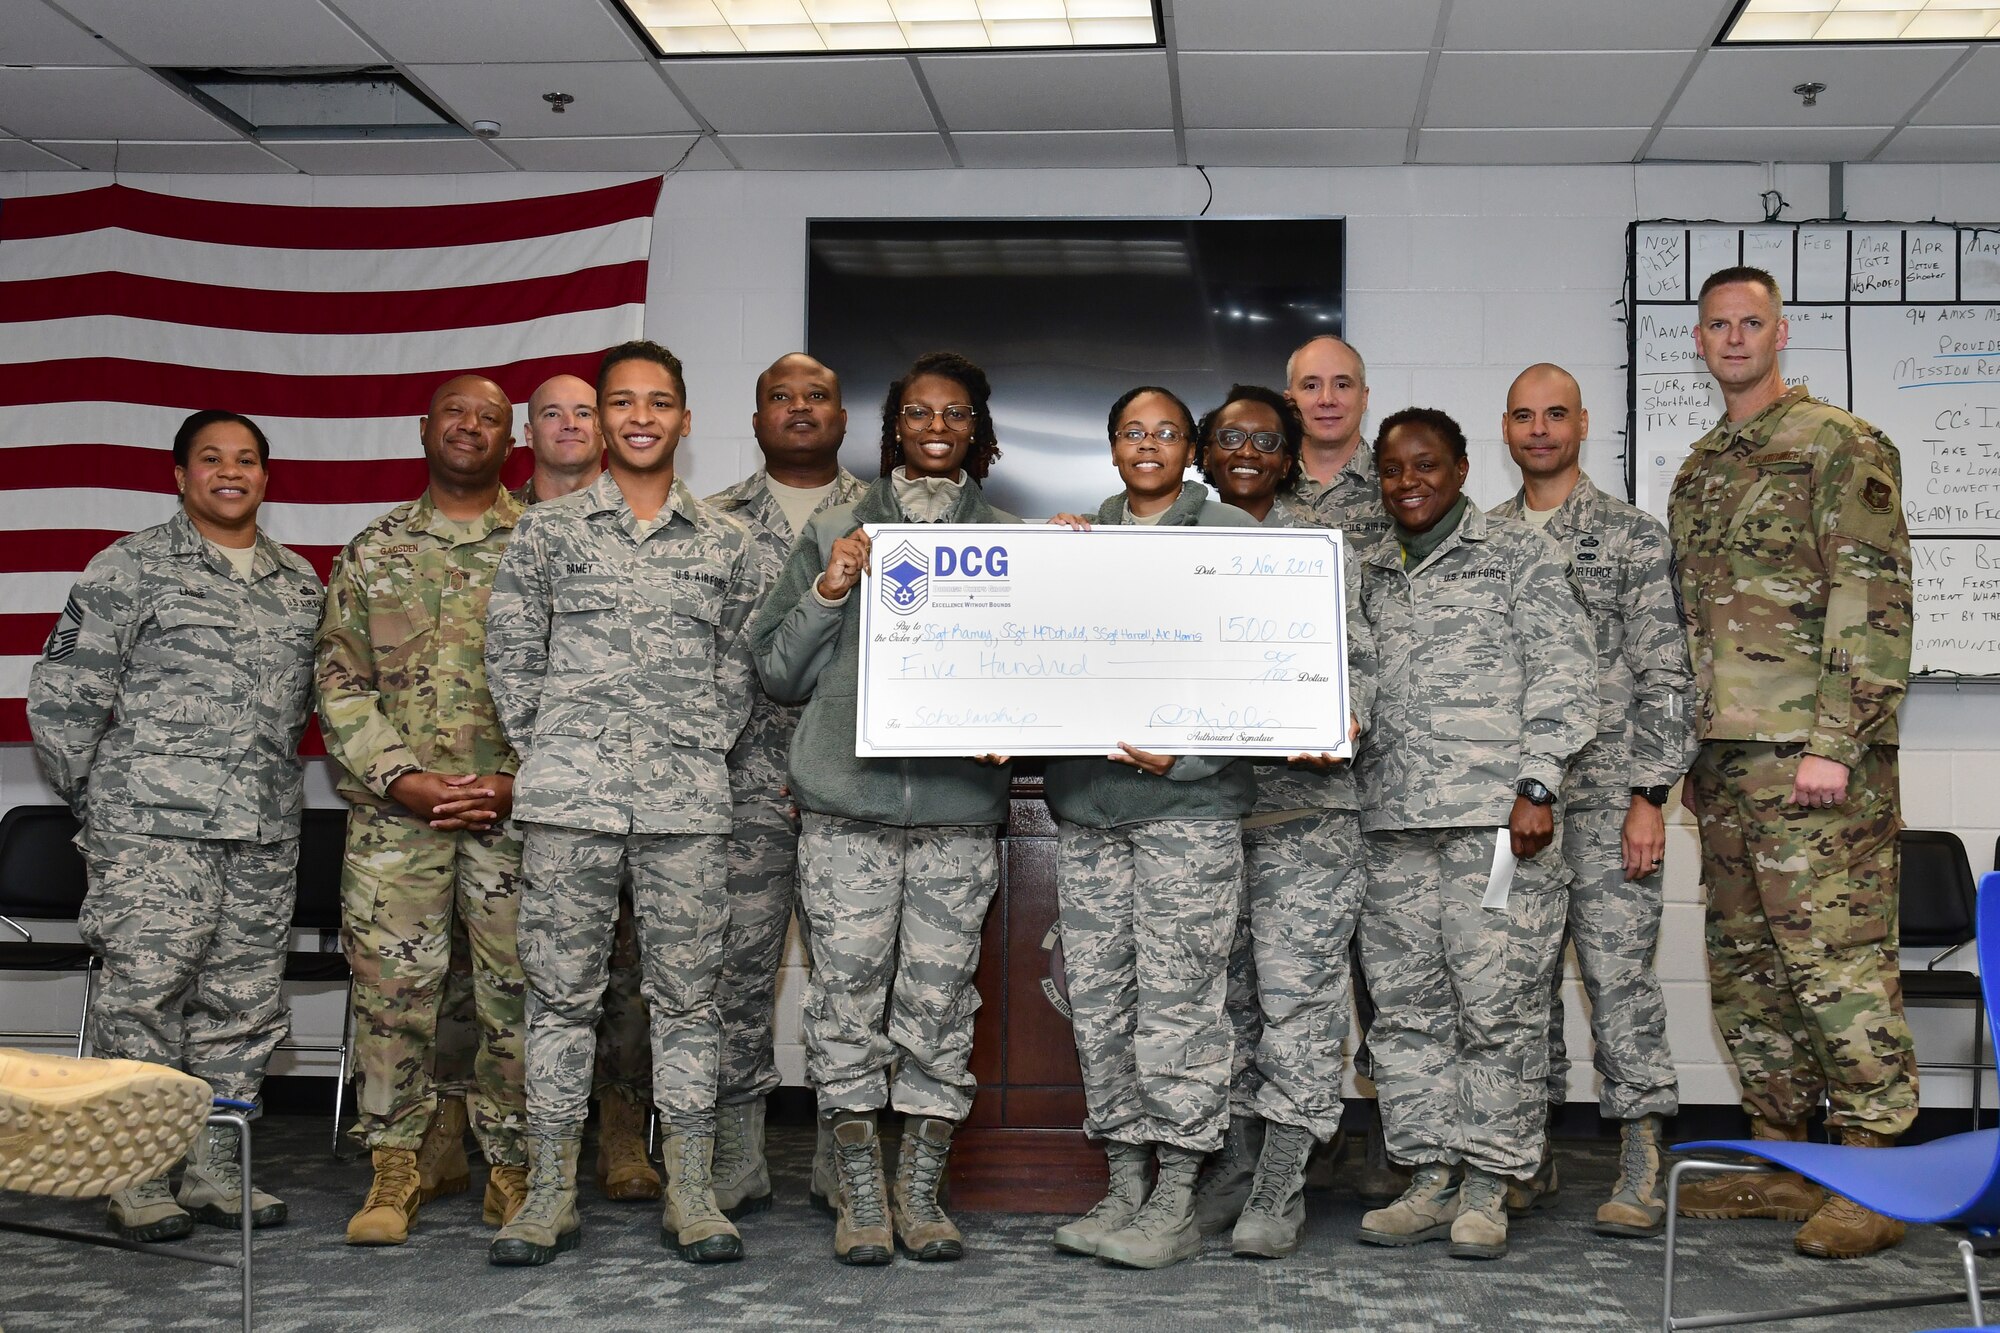 The Dobbins Chief Group Scholarship winners pose with the DCG during a ceremony held at Dobbins Air Reserve Base, Ga. on Nov. 4, 2019. Each winner received a check for $500 to be used towards school expenses. (U.S. Air Force photo/Tech. Sgt. Andrew Park)